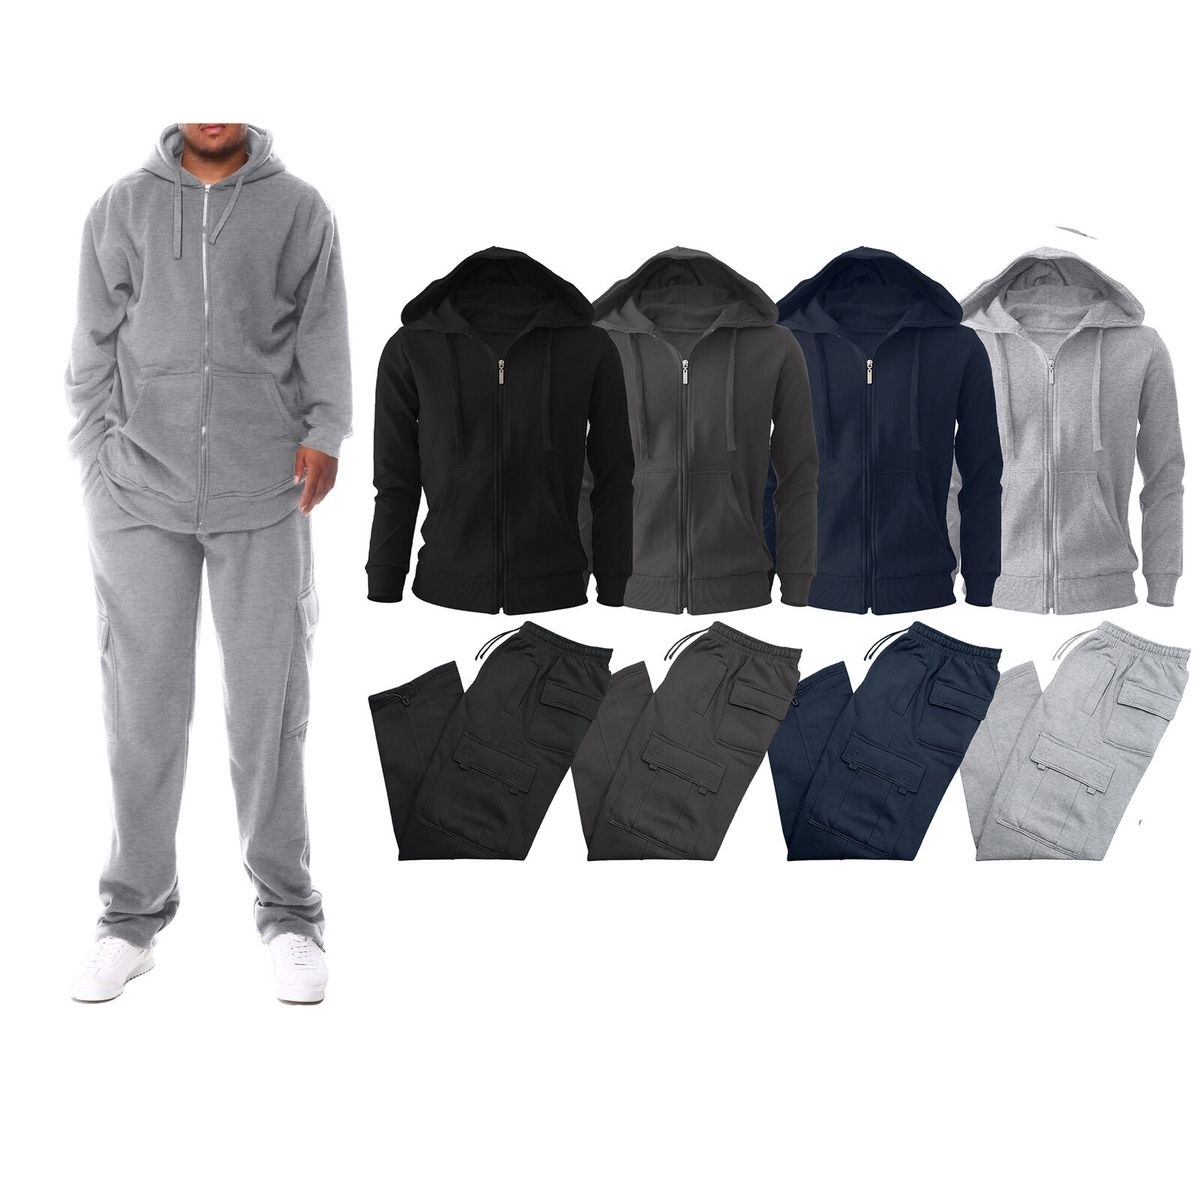 Men's Big & Tall Winter Warm Athletic Active Cozy Fleece Lined Multi-Pocket Full Zip Up Cargo Tracksuit - Grey, Xx-large